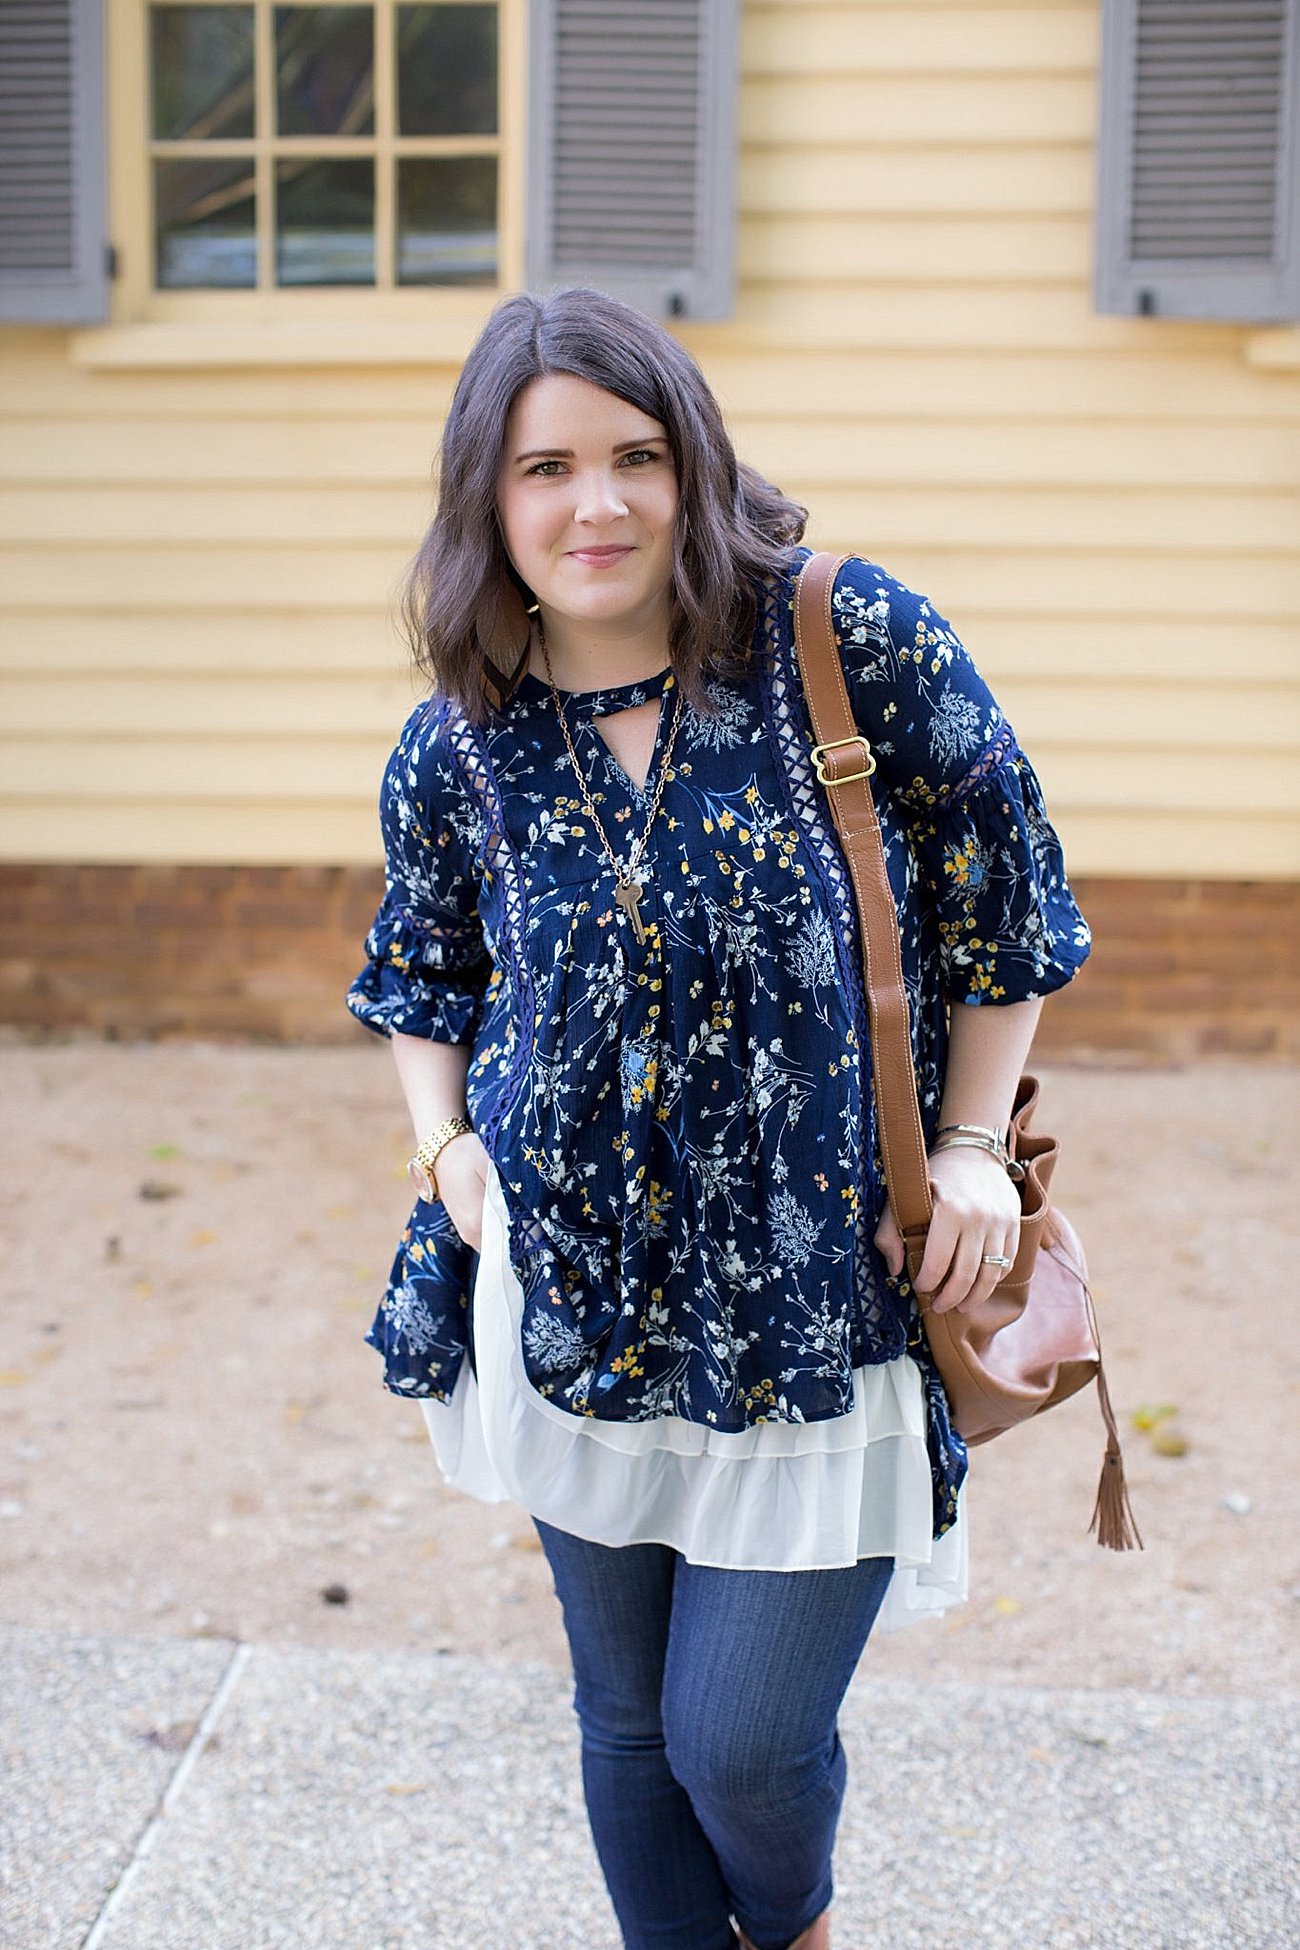 Grace & Lace peasant top and chiffon lace extender from The Flourish Market, Paige denim, Root Collective espe booties | Ethical Fashion, North Carolina Life and Style Blogger (9)